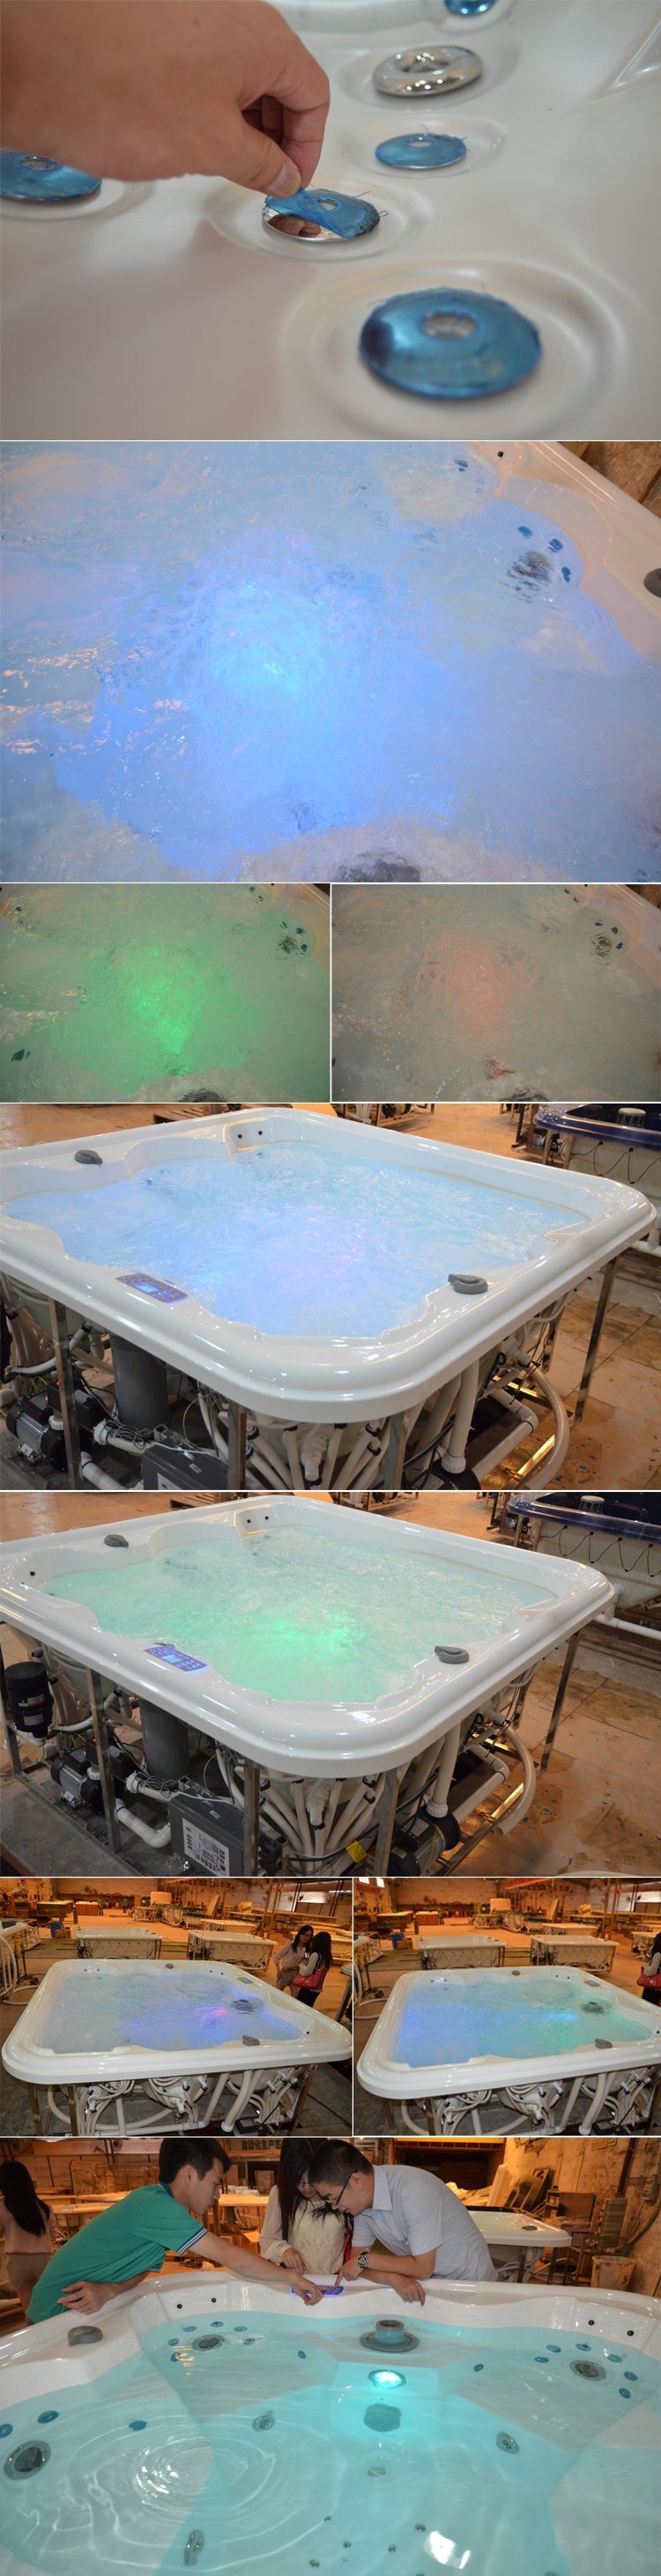 Hot Sale Indoor Outdoor 6 Person Acrylic Whirlpool Hot Tub